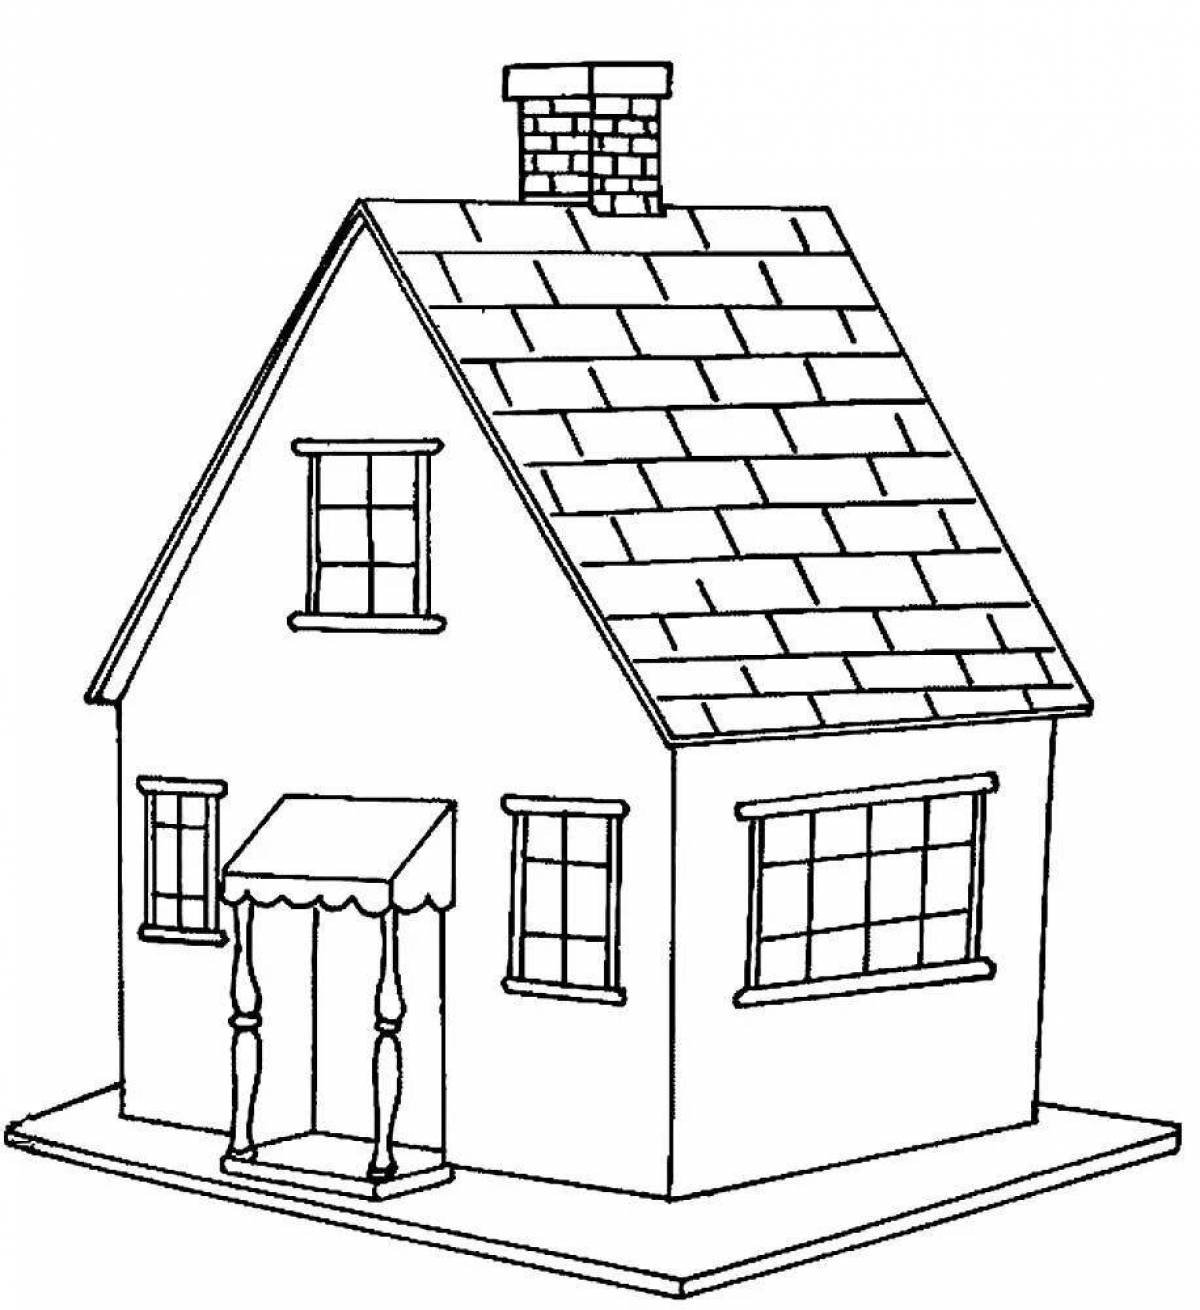 Glorious houses coloring pages for kids